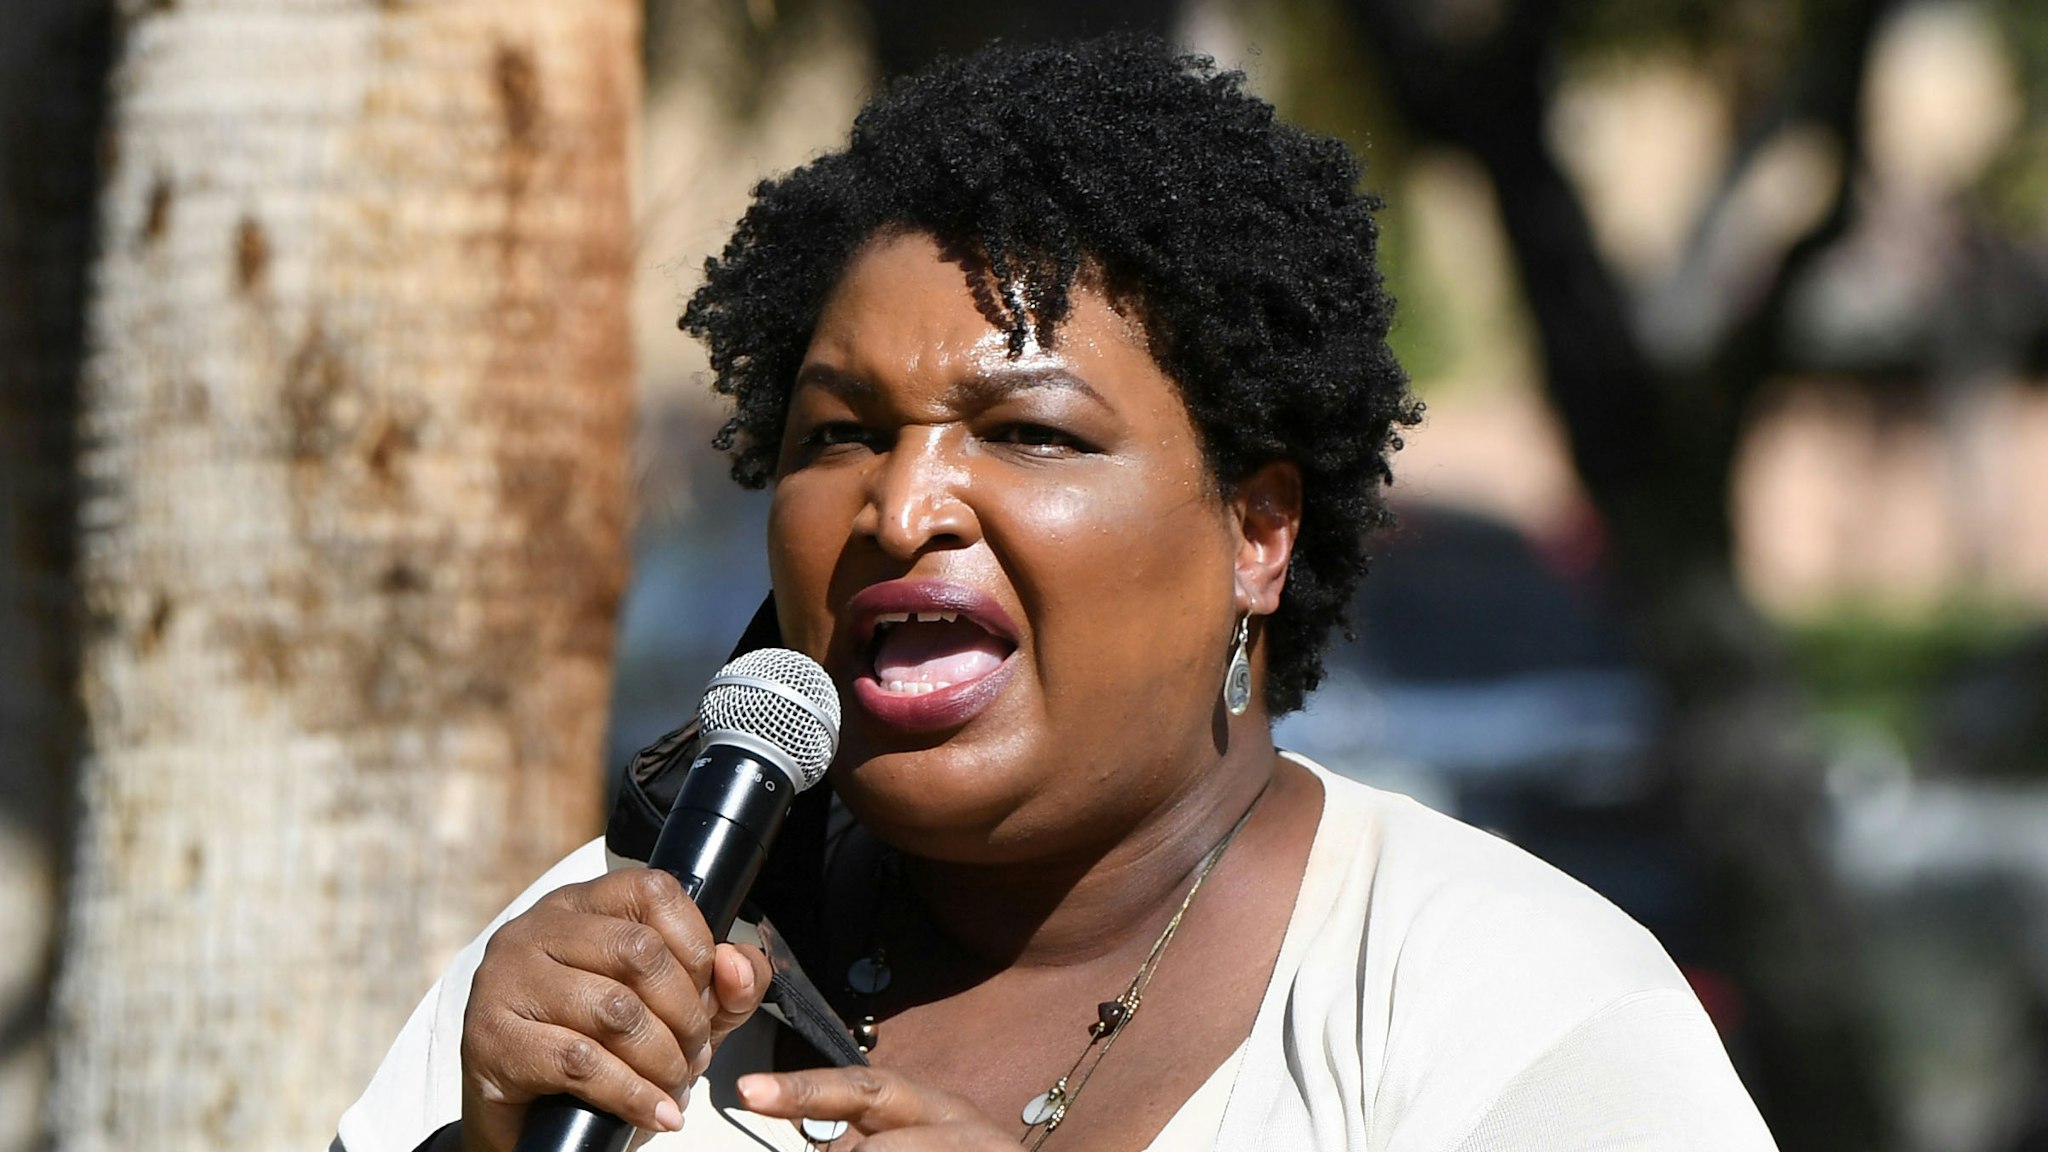 LAS VEGAS, NEVADA - OCTOBER 24: Former Georgia gubernatorial candidate Stacey Abrams speaks at a Democratic canvass kickoff as she campaigns for Joe Biden and Kamala Harris at Bruce Trent Park on October 24, 2020 in Las Vegas, Nevada. In-person early voting for the general election in the battleground state began on October 17 and continues through October 30.